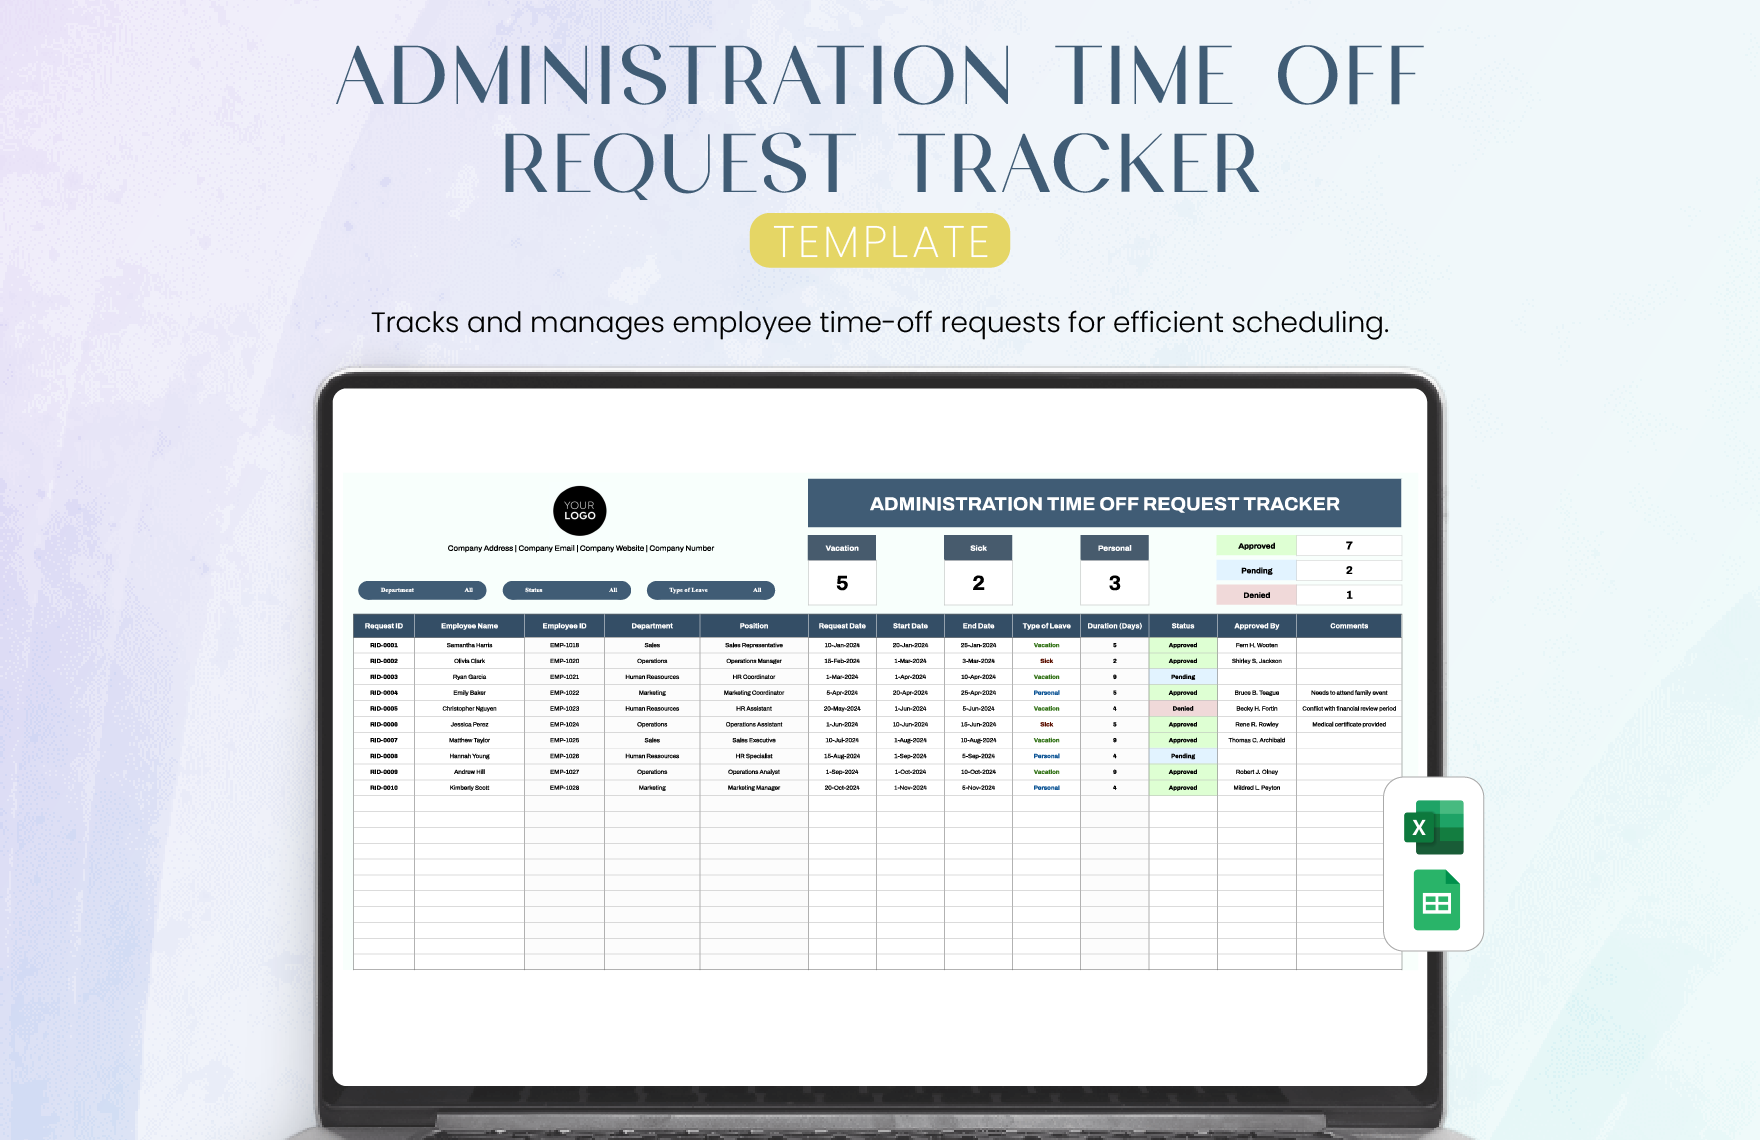 Administration Time Off Request Tracker Template in Excel, Google Sheets